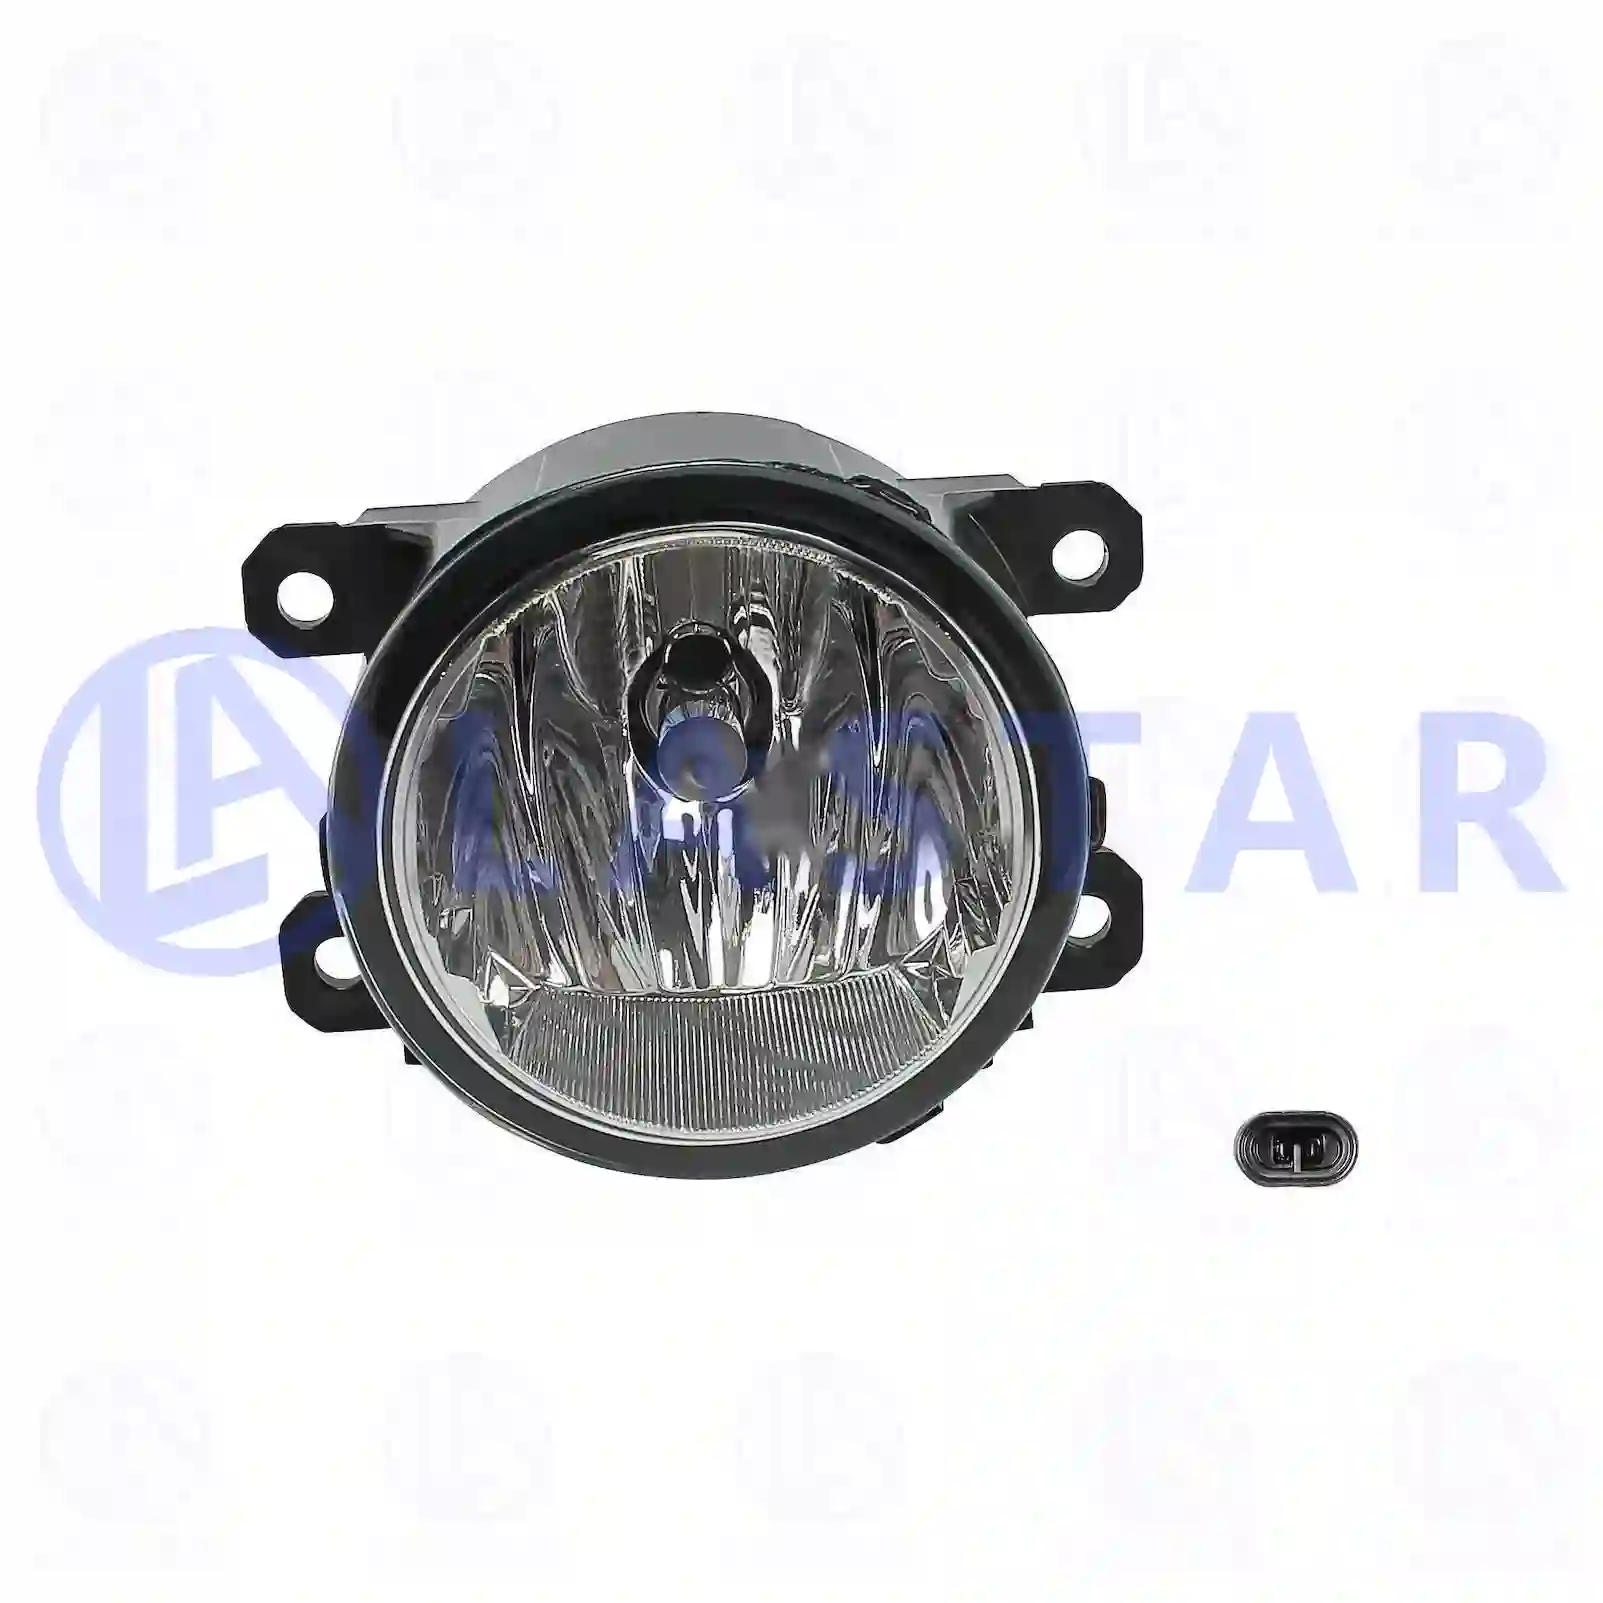 Fog lamp, with bulb, 77712360, 1612502180, 51858824, 71771824, 5801587021, 1612502180 ||  77712360 Lastar Spare Part | Truck Spare Parts, Auotomotive Spare Parts Fog lamp, with bulb, 77712360, 1612502180, 51858824, 71771824, 5801587021, 1612502180 ||  77712360 Lastar Spare Part | Truck Spare Parts, Auotomotive Spare Parts